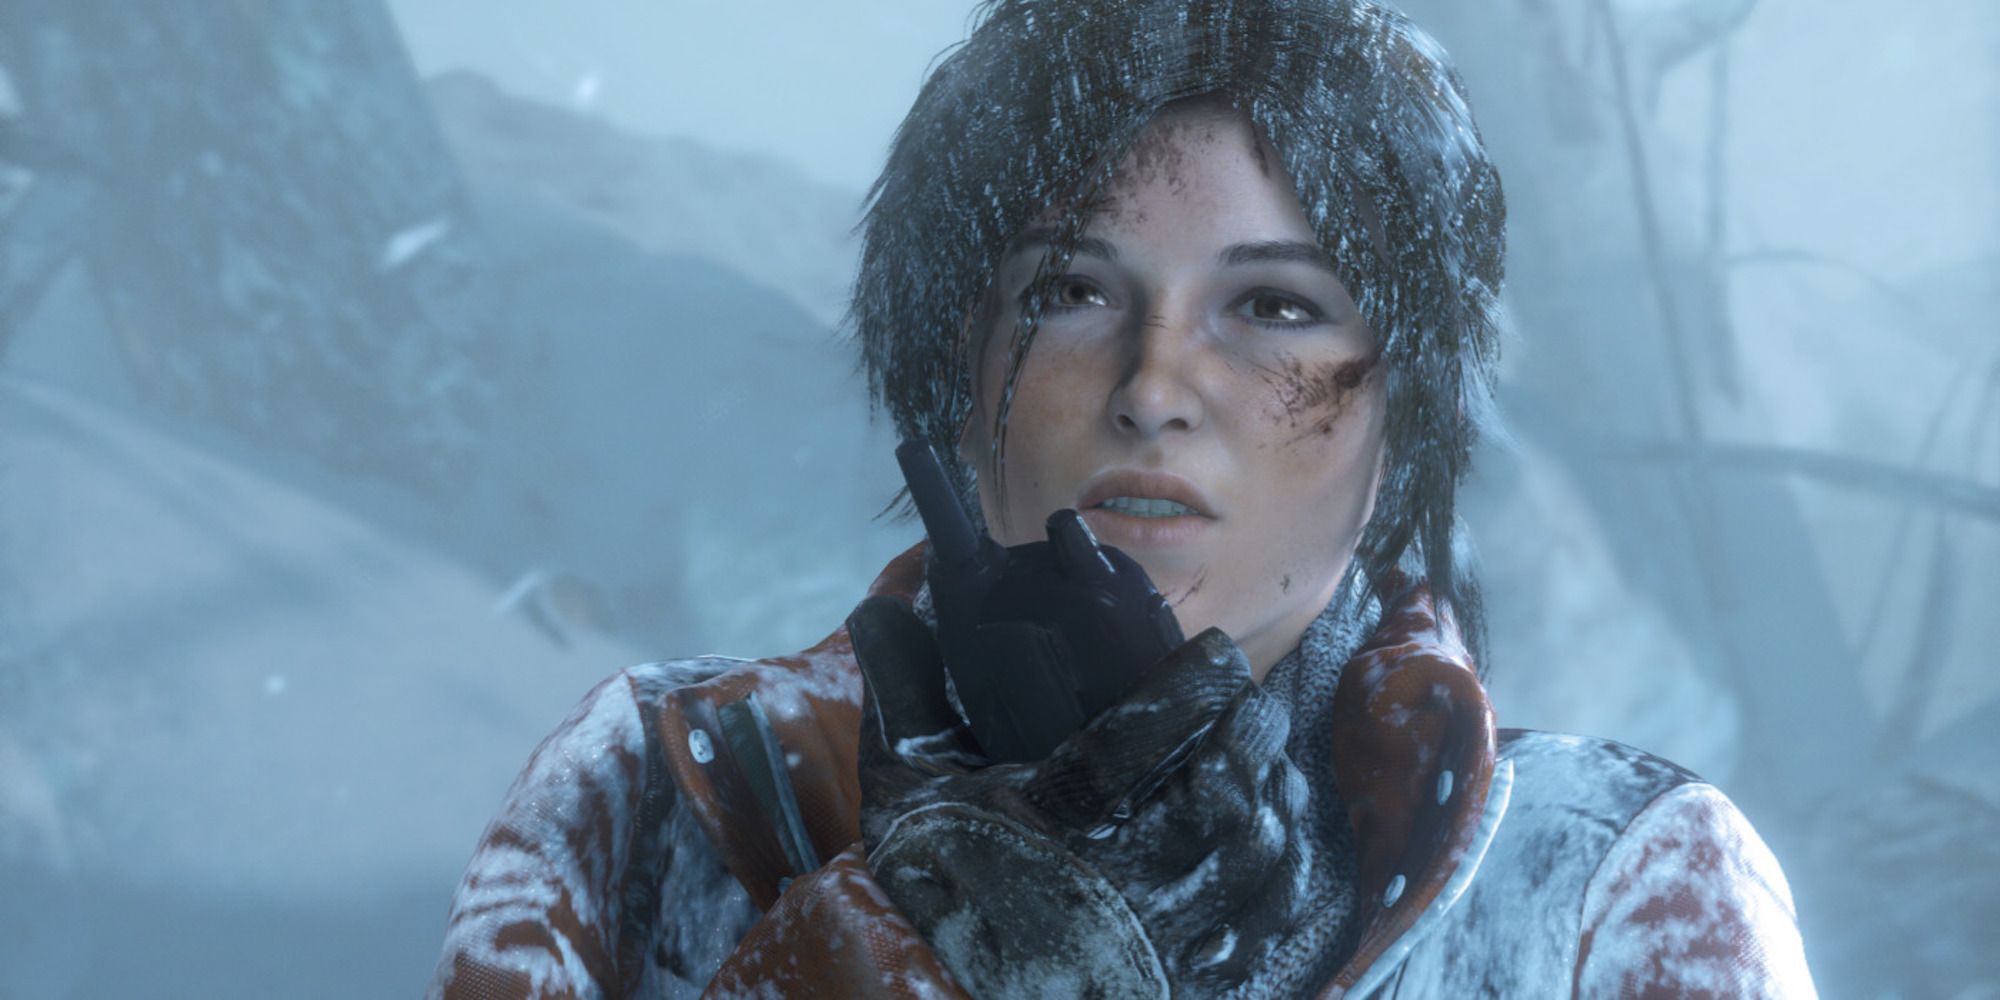 Lara from Rise Of The Tomb Raider